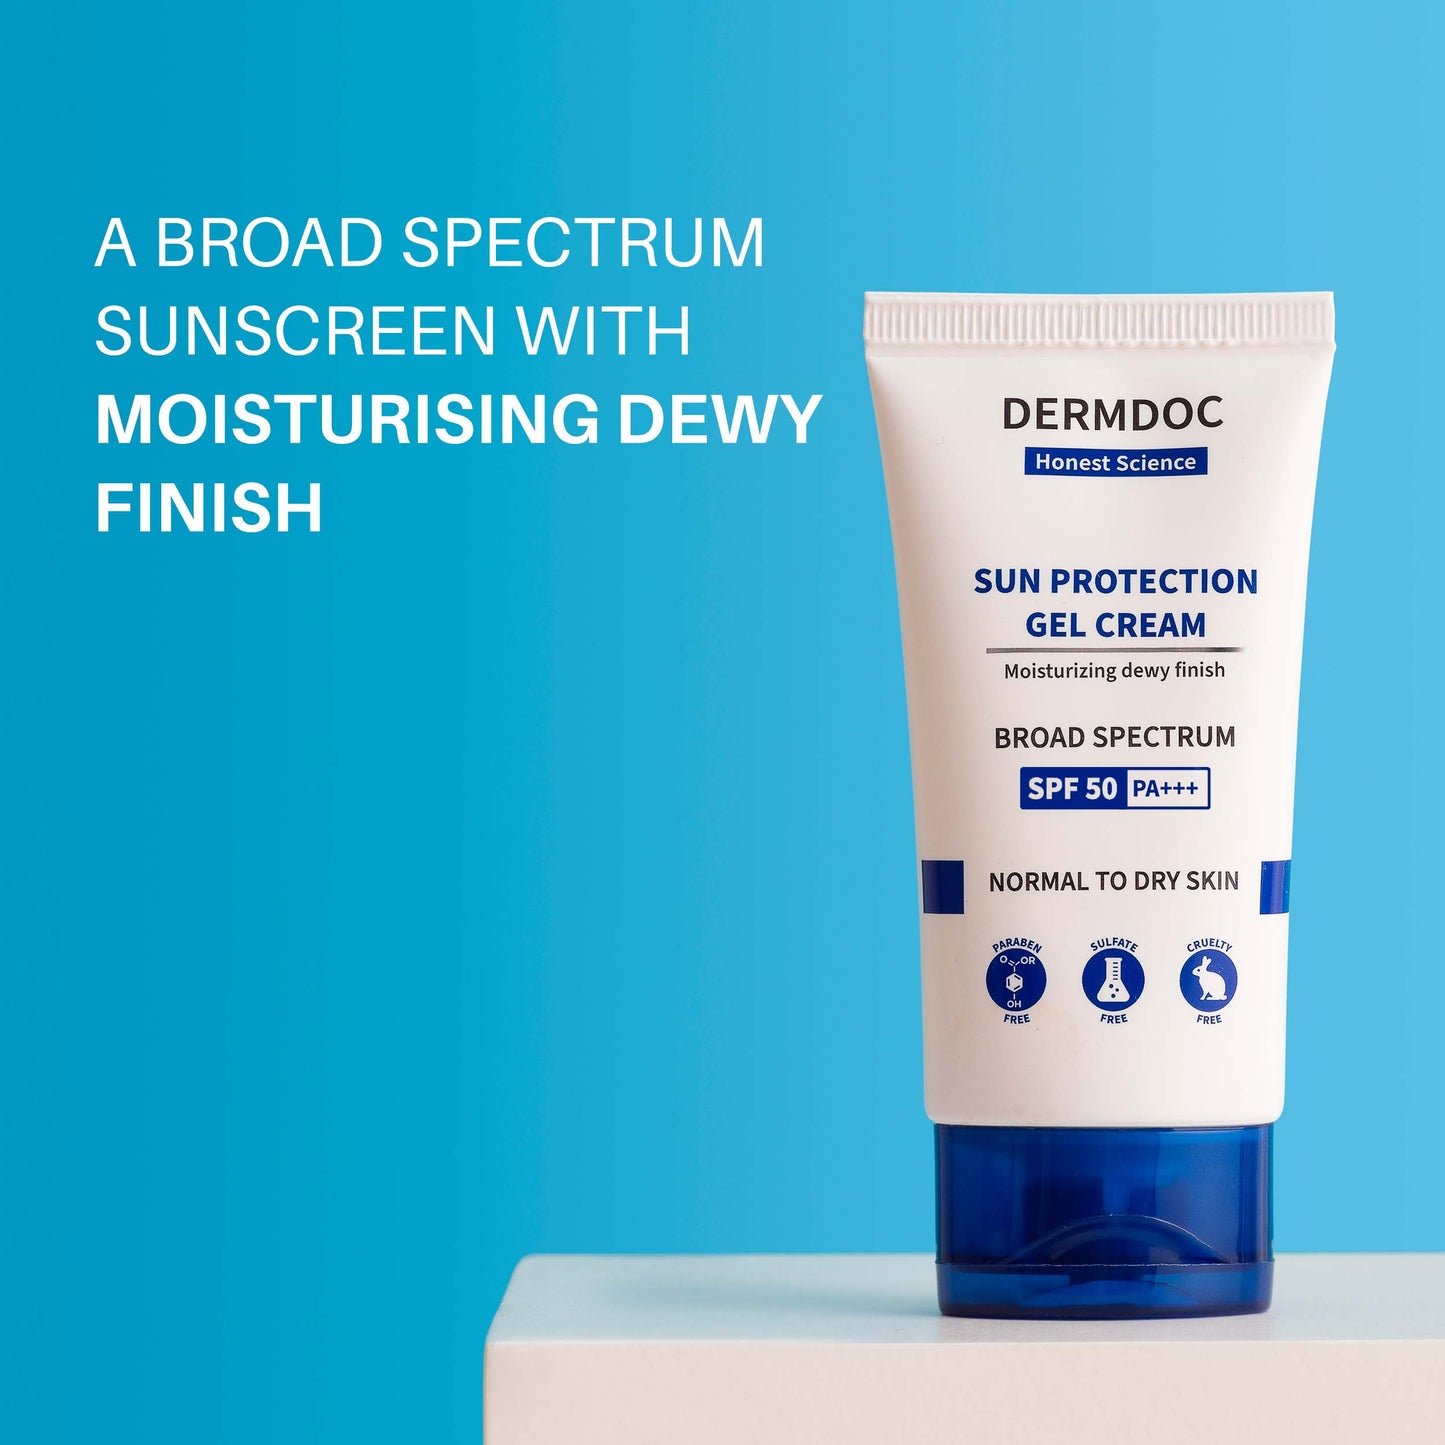 DermDoc by Purplle UVA & UVB Broad Spectrum Sun Protection Gel Cream with SPF 50 & PA+++